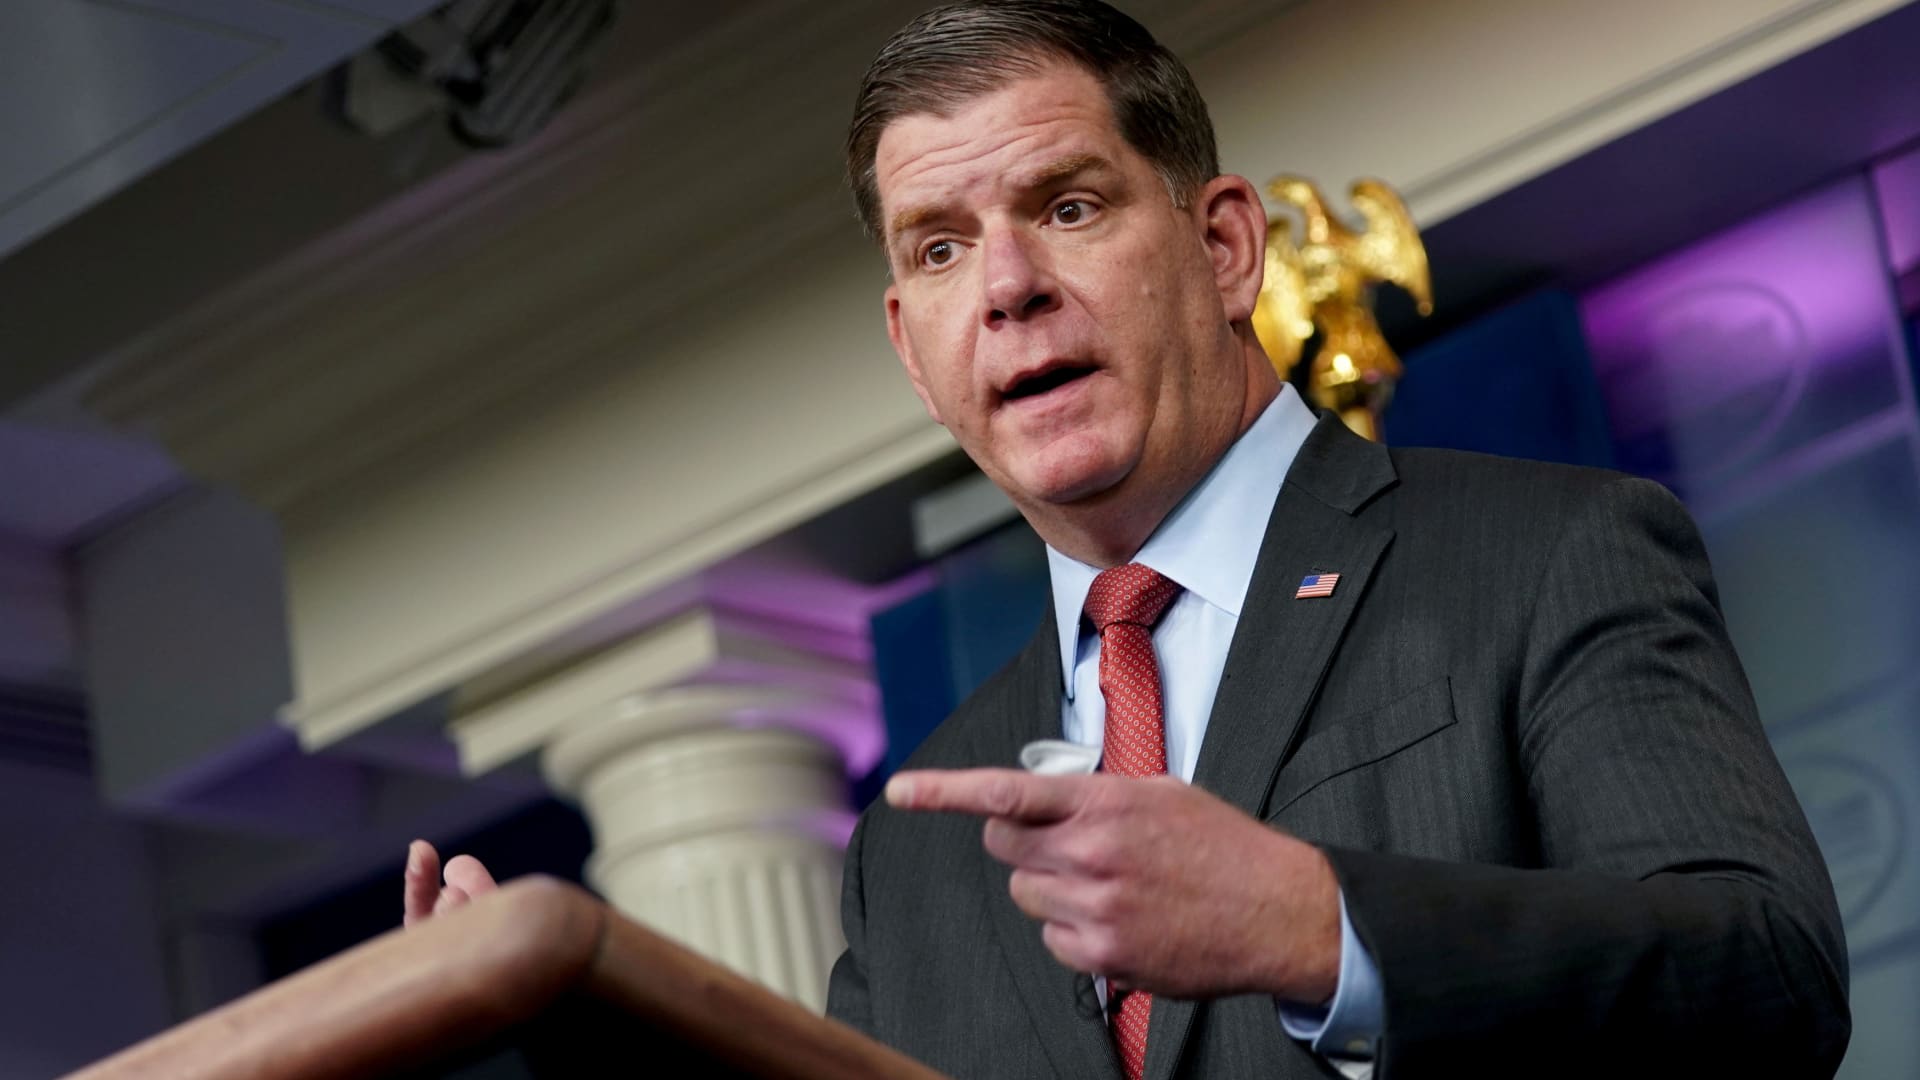 Secretary of Labor Marty Walsh speaks during a news conference at the White House in Washington, April 2, 2021.